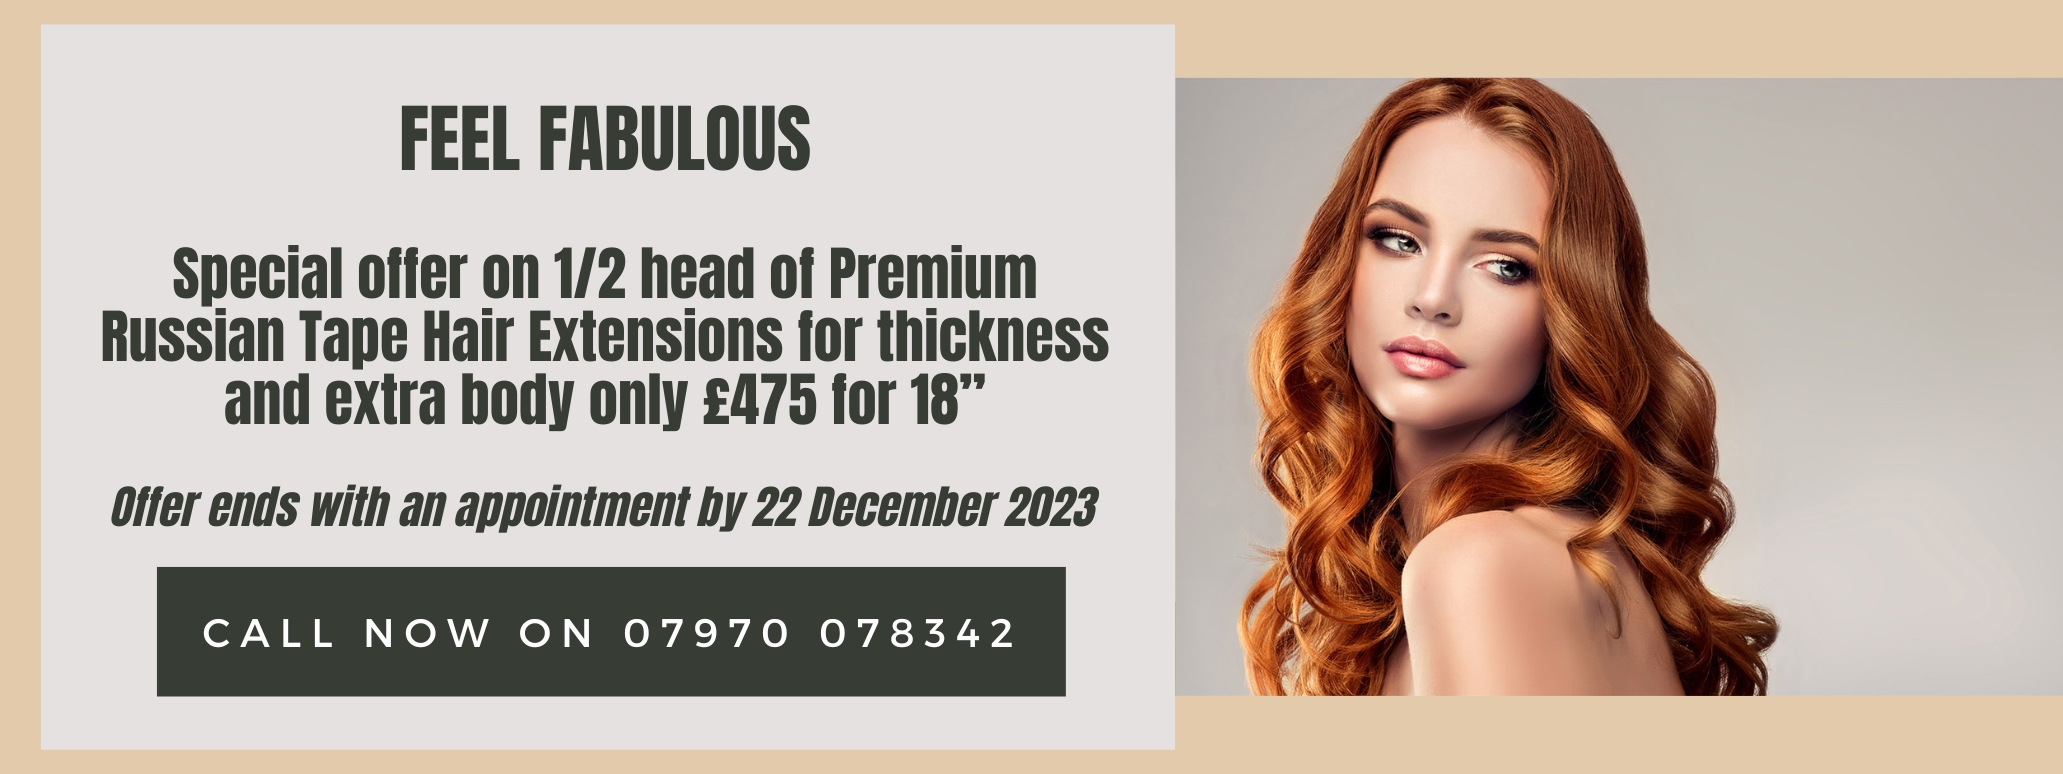 Celeb Hair Extensions special offer for half head of premium russian tape hair extensions